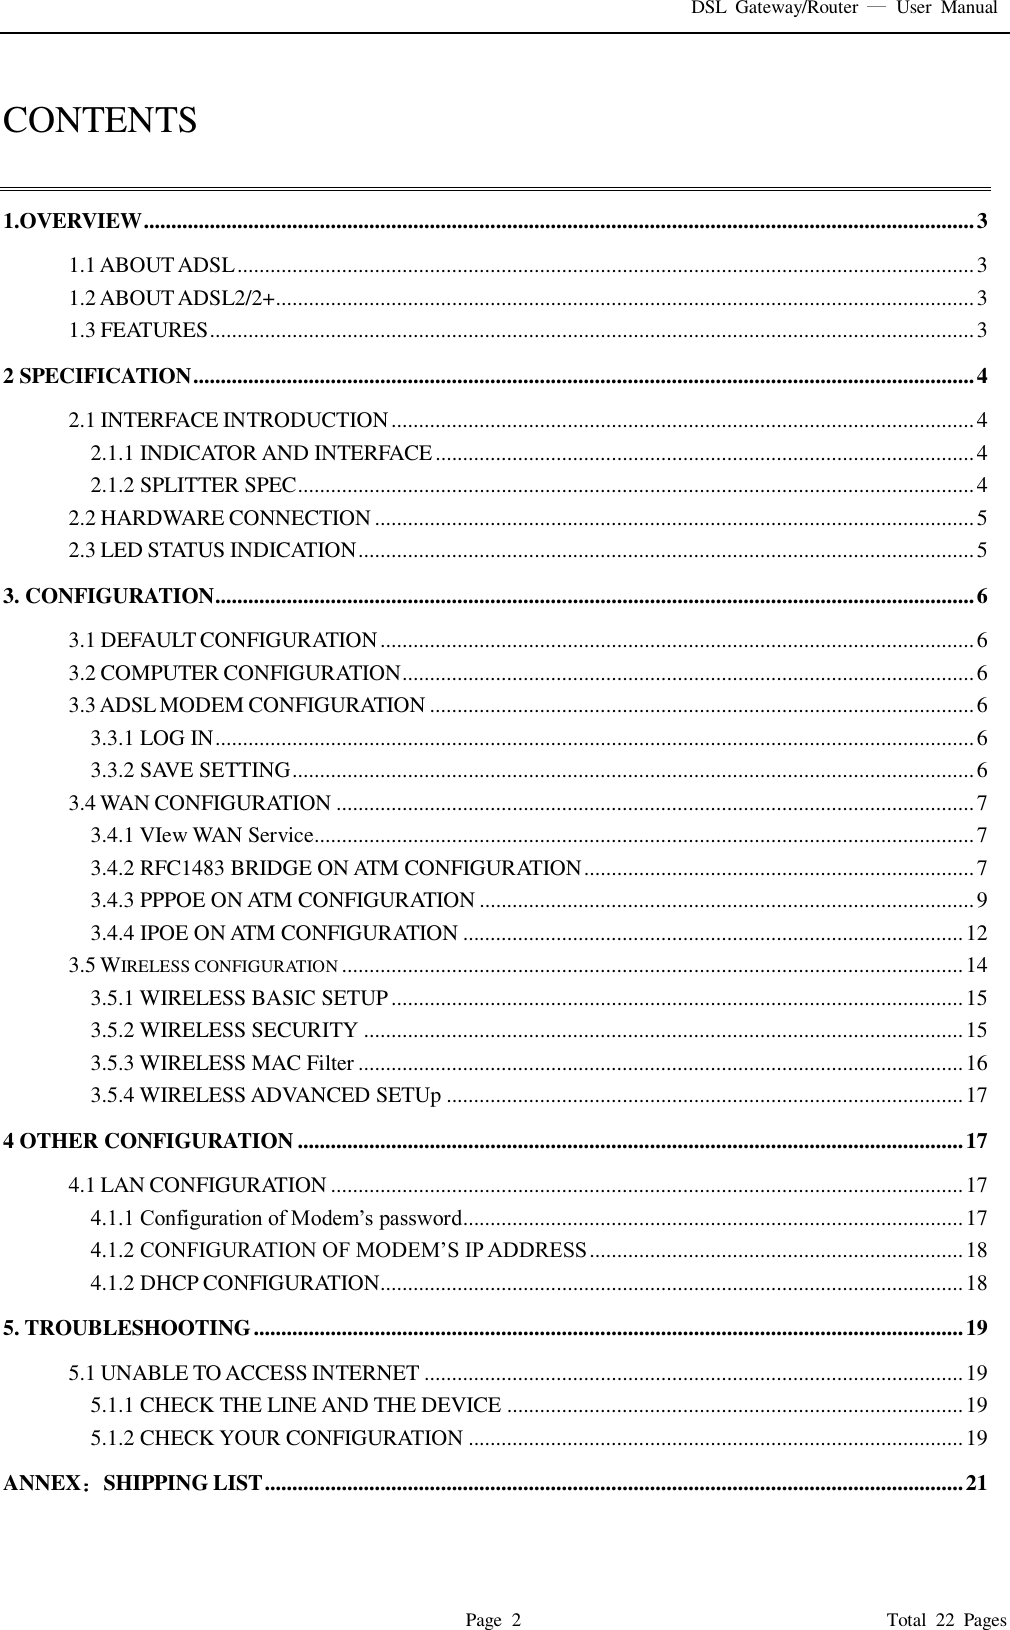 DSL  Gateway/Router    User  Manual   Page  2                                                                              Total  22  Pages  CONTENTS  1.OVERVIEW ....................................................................................................................................................... 3 1.1 ABOUT ADSL ...................................................................................................................................... 3 1.2 ABOUT ADSL2/2+ ............................................................................................................................... 3 1.3 FEATURES ........................................................................................................................................... 3 2 SPECIFICATION .............................................................................................................................................. 4 2.1 INTERFACE INTRODUCTION .......................................................................................................... 4 2.1.1 INDICATOR AND INTERFACE .................................................................................................. 4 2.1.2 SPLITTER SPEC ........................................................................................................................... 4 2.2 HARDWARE CONNECTION ............................................................................................................. 5 2.3 LED STATUS INDICATION ................................................................................................................ 5 3. CONFIGURATION .......................................................................................................................................... 6 3.1 DEFAULT CONFIGURATION ............................................................................................................ 6 3.2 COMPUTER CONFIGURATION ........................................................................................................ 6 3.3 ADSL MODEM CONFIGURATION ................................................................................................... 6 3.3.1 LOG IN .......................................................................................................................................... 6 3.3.2 SAVE SETTING ............................................................................................................................ 6 3.4 WAN CONFIGURATION .................................................................................................................... 7 3.4.1 VIew WAN Service........................................................................................................................ 7 3.4.2 RFC1483 BRIDGE ON ATM CONFIGURATION ....................................................................... 7 3.4.3 PPPOE ON ATM CONFIGURATION .......................................................................................... 9 3.4.4 IPOE ON ATM CONFIGURATION ........................................................................................... 12 3.5 WIRELESS CONFIGURATION ................................................................................................................. 14 3.5.1 WIRELESS BASIC SETUP ........................................................................................................ 15 3.5.2 WIRELESS SECURITY ............................................................................................................. 15 3.5.3 WIRELESS MAC Filter .............................................................................................................. 16 3.5.4 WIRELESS ADVANCED SETUp .............................................................................................. 17 4 OTHER CONFIGURATION ......................................................................................................................... 17 4.1 LAN CONFIGURATION ................................................................................................................... 17 4.1.1 Configuration of Modem’s password........................................................................................... 17 4.1.2 CONFIGURATION OF MODEM’S IP ADDRESS .................................................................... 18 4.1.2 DHCP CONFIGURATION.......................................................................................................... 18 5. TROUBLESHOOTING ................................................................................................................................. 19 5.1 UNABLE TO ACCESS INTERNET .................................................................................................. 19 5.1.1 CHECK THE LINE AND THE DEVICE ................................................................................... 19 5.1.2 CHECK YOUR CONFIGURATION .......................................................................................... 19 ANNEX SHIPPING LIST ............................................................................................................................... 21 